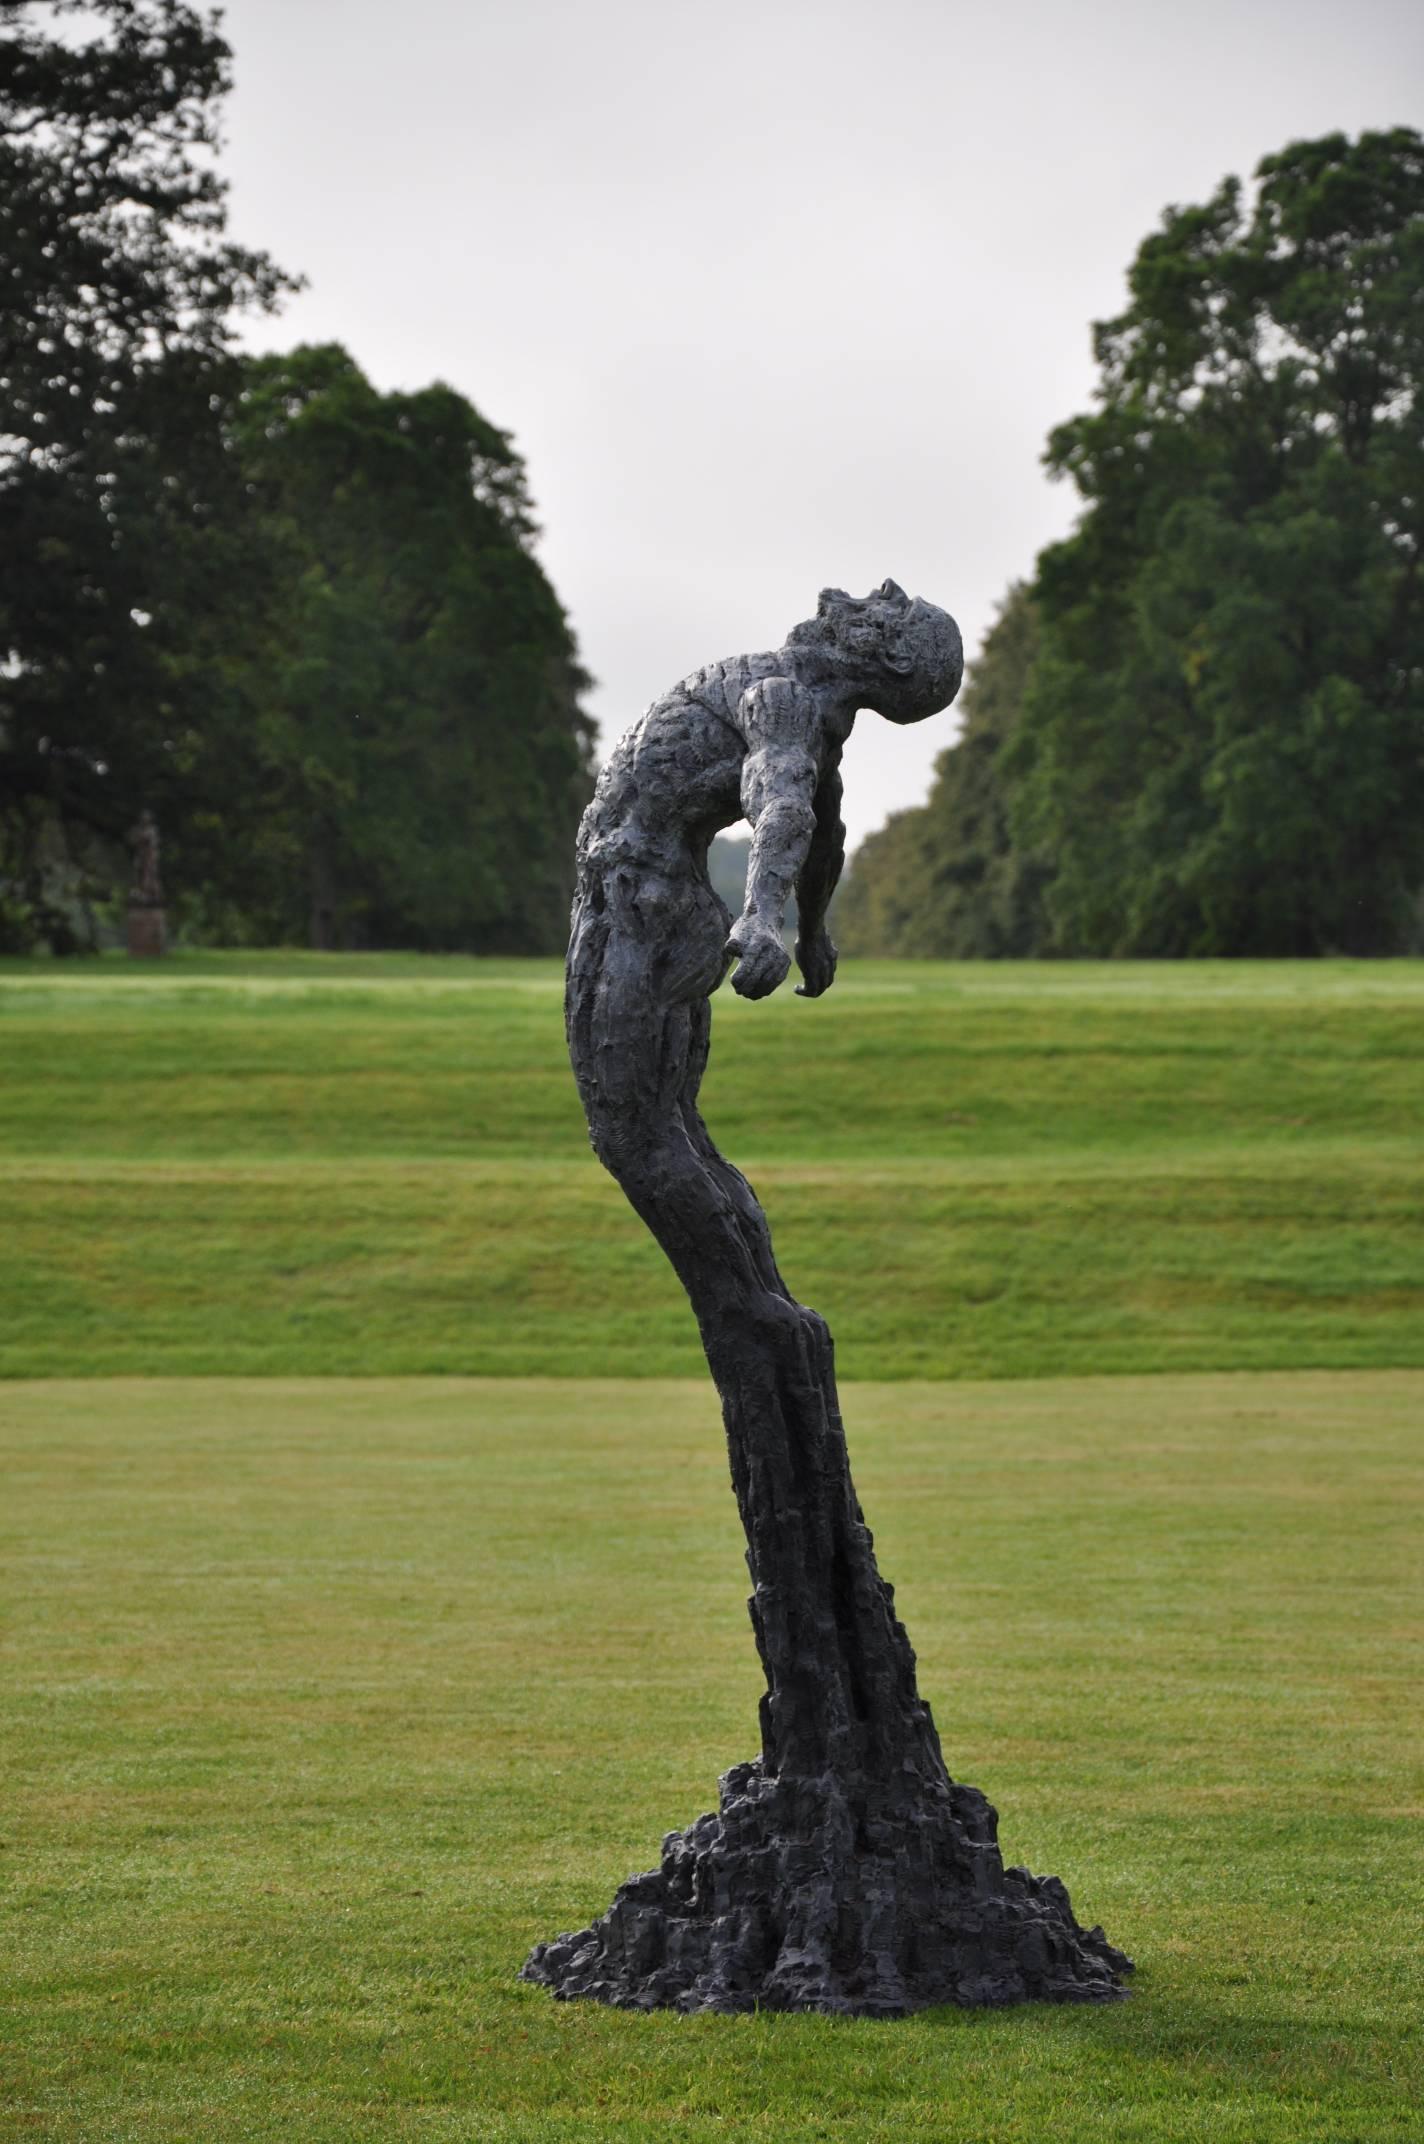 Ian Edwards - The Calling - Original Signed Bronze Sculpure
Dimensions: 120 x 55 x 55 cm 
Edition of 12	

Edwards’ practice expresses the power and determination of human endeavour. He
draws inspiration from natural forces, with his powerful